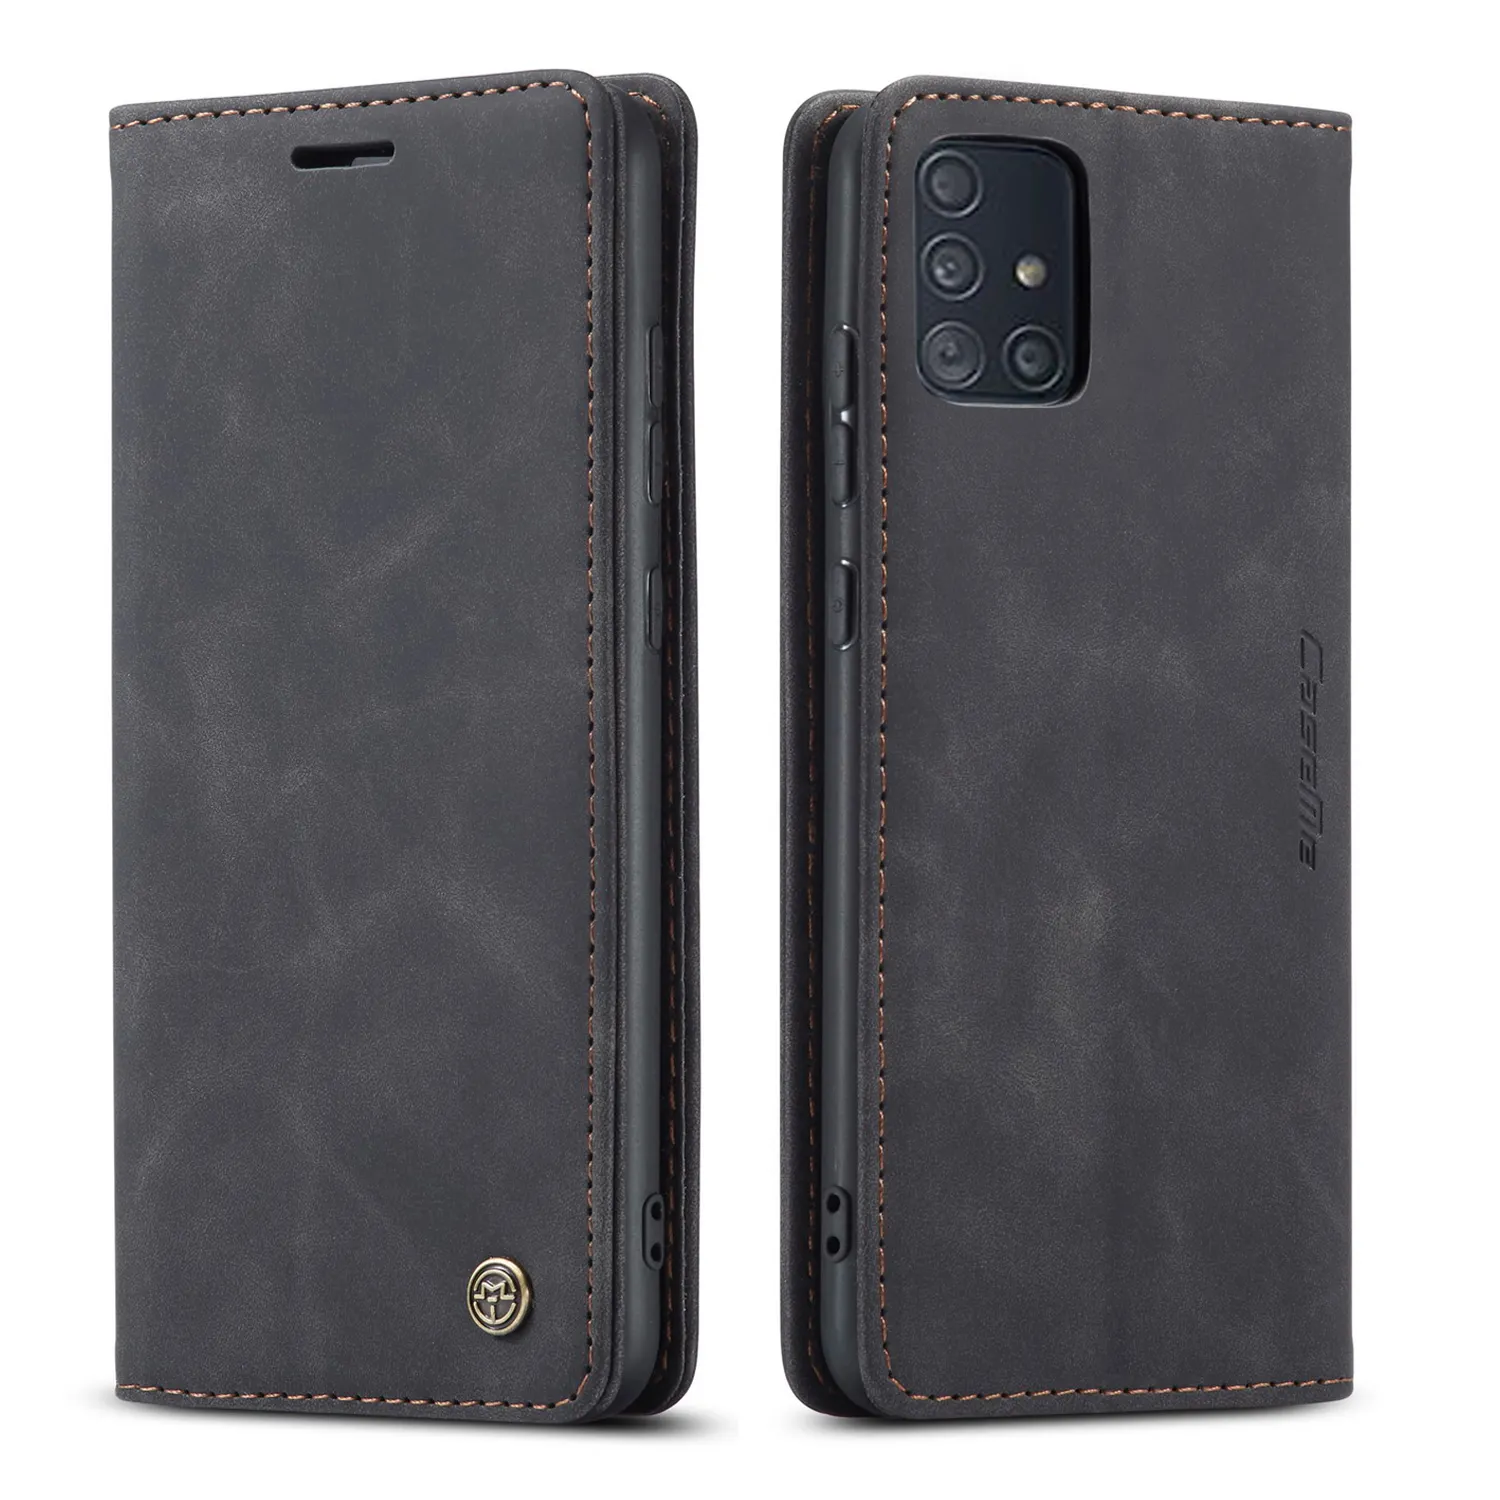 caseme skin leather mobile phone cae for samsung galaxy A51 A71 strong magnetic flip wallet case